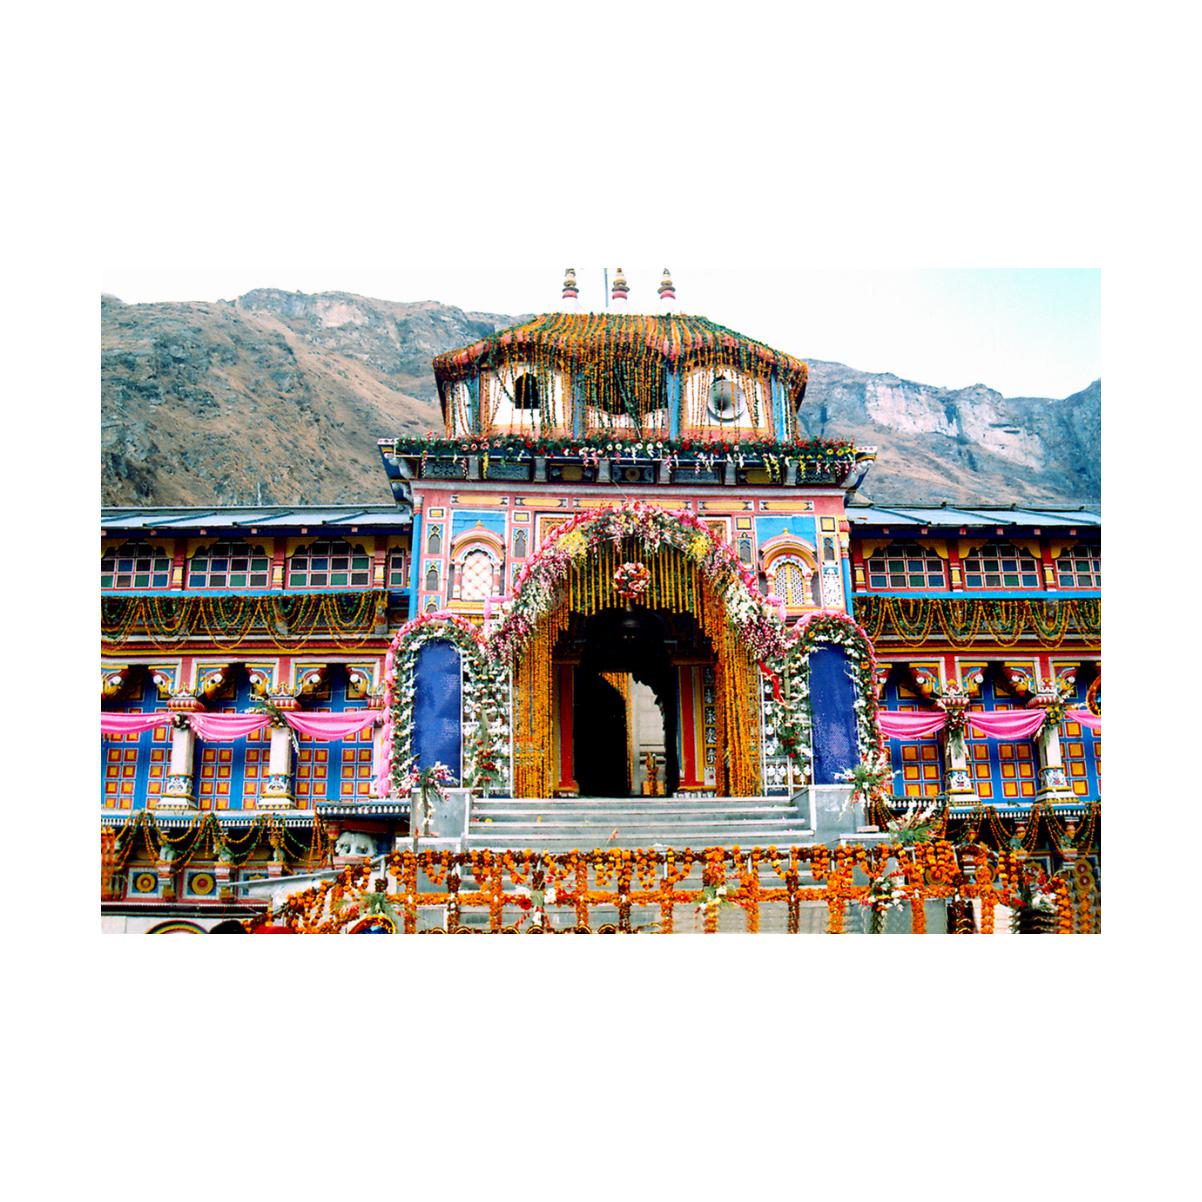 Badrinath God Images Wallpapers